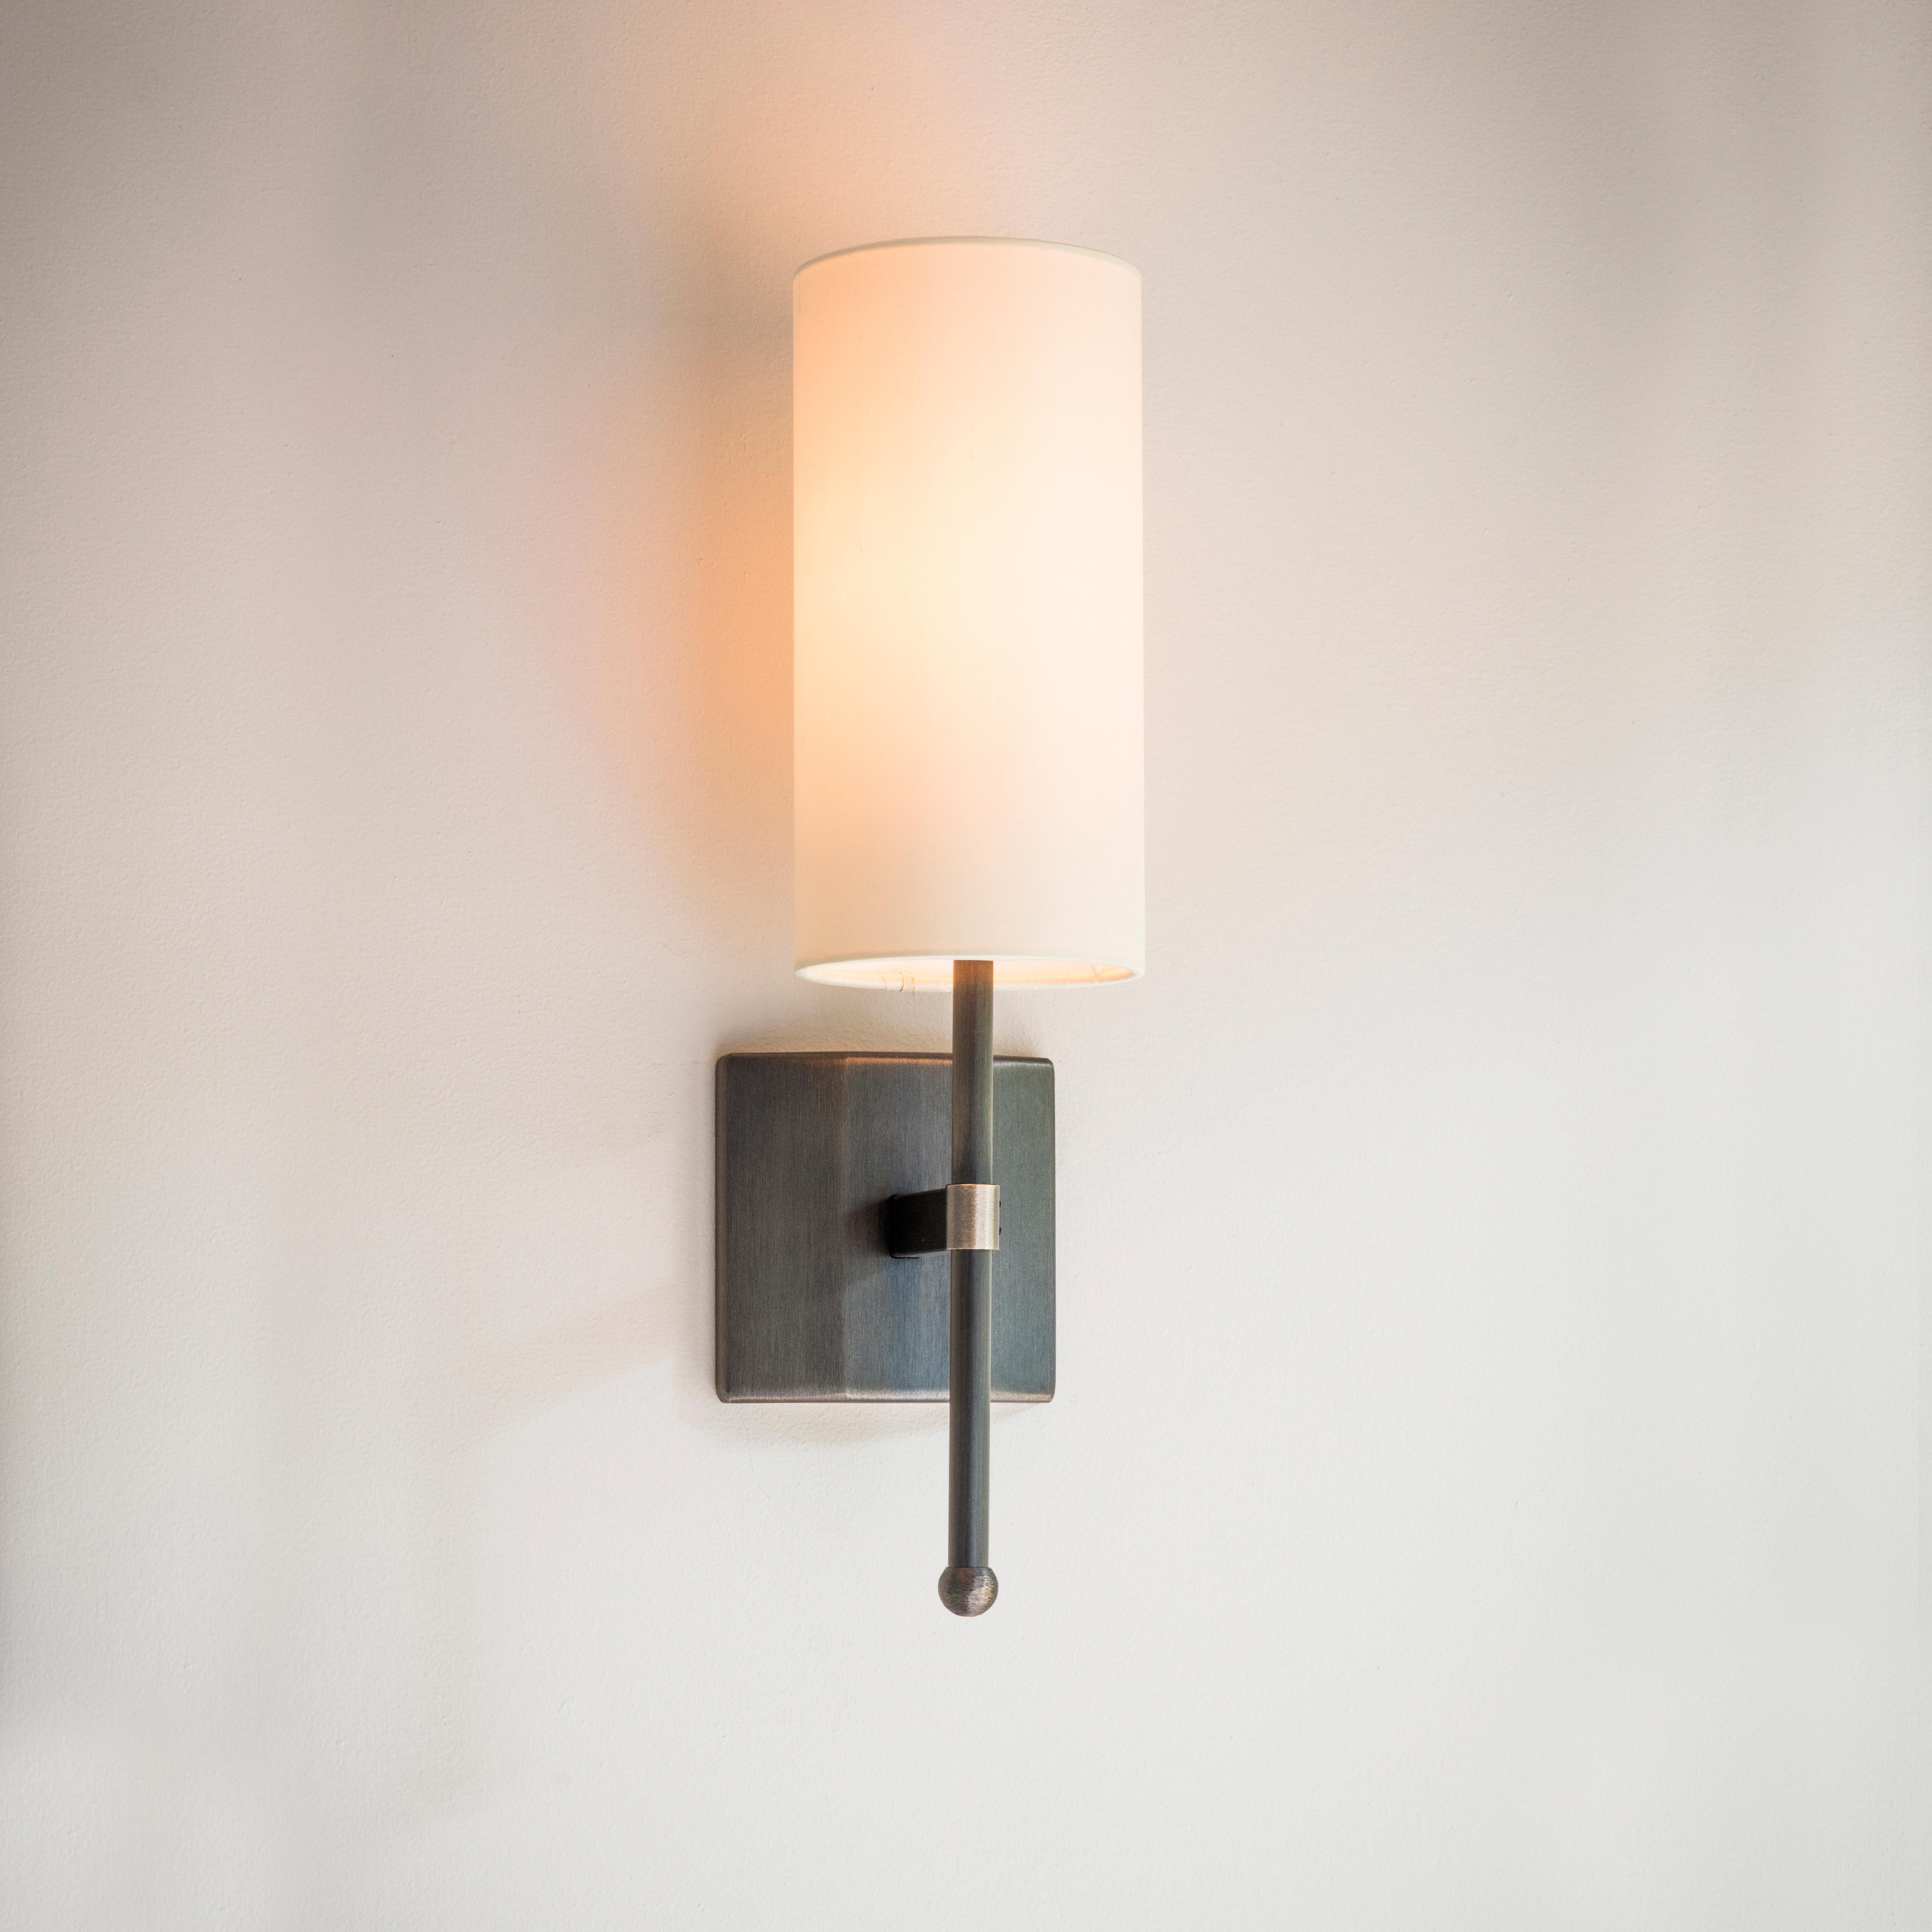 An elegant handcrafted metal stem frame, supporting silk douppion shades. The hand-grained patinated Bronze metalwork is perfectly balanced by the richness of silk shades.

Designed and handmade by Tigermoth Lighting on the banks of the river